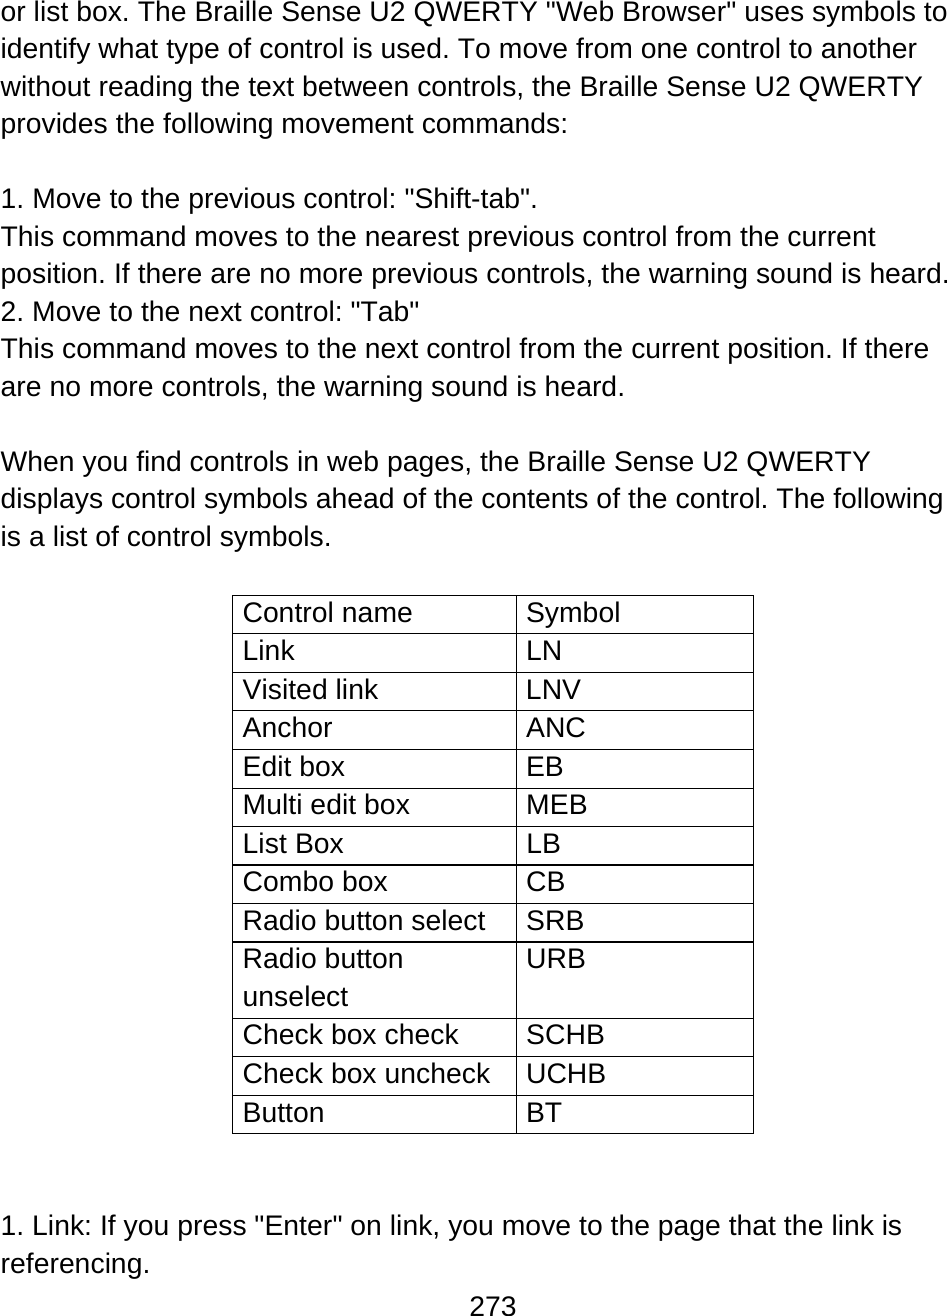 273  or list box. The Braille Sense U2 QWERTY &quot;Web Browser&quot; uses symbols to identify what type of control is used. To move from one control to another without reading the text between controls, the Braille Sense U2 QWERTY provides the following movement commands:  1. Move to the previous control: &quot;Shift-tab&quot;.  This command moves to the nearest previous control from the current position. If there are no more previous controls, the warning sound is heard. 2. Move to the next control: &quot;Tab&quot; This command moves to the next control from the current position. If there are no more controls, the warning sound is heard.  When you find controls in web pages, the Braille Sense U2 QWERTY displays control symbols ahead of the contents of the control. The following is a list of control symbols.  Control name  Symbol Link LN Visited link  LNV Anchor ANC Edit box  EB Multi edit box  MEB List Box  LB Combo box  CB Radio button select  SRB Radio button unselect URB Check box check  SCHB Check box uncheck  UCHB Button BT   1. Link: If you press &quot;Enter&quot; on link, you move to the page that the link is referencing. 